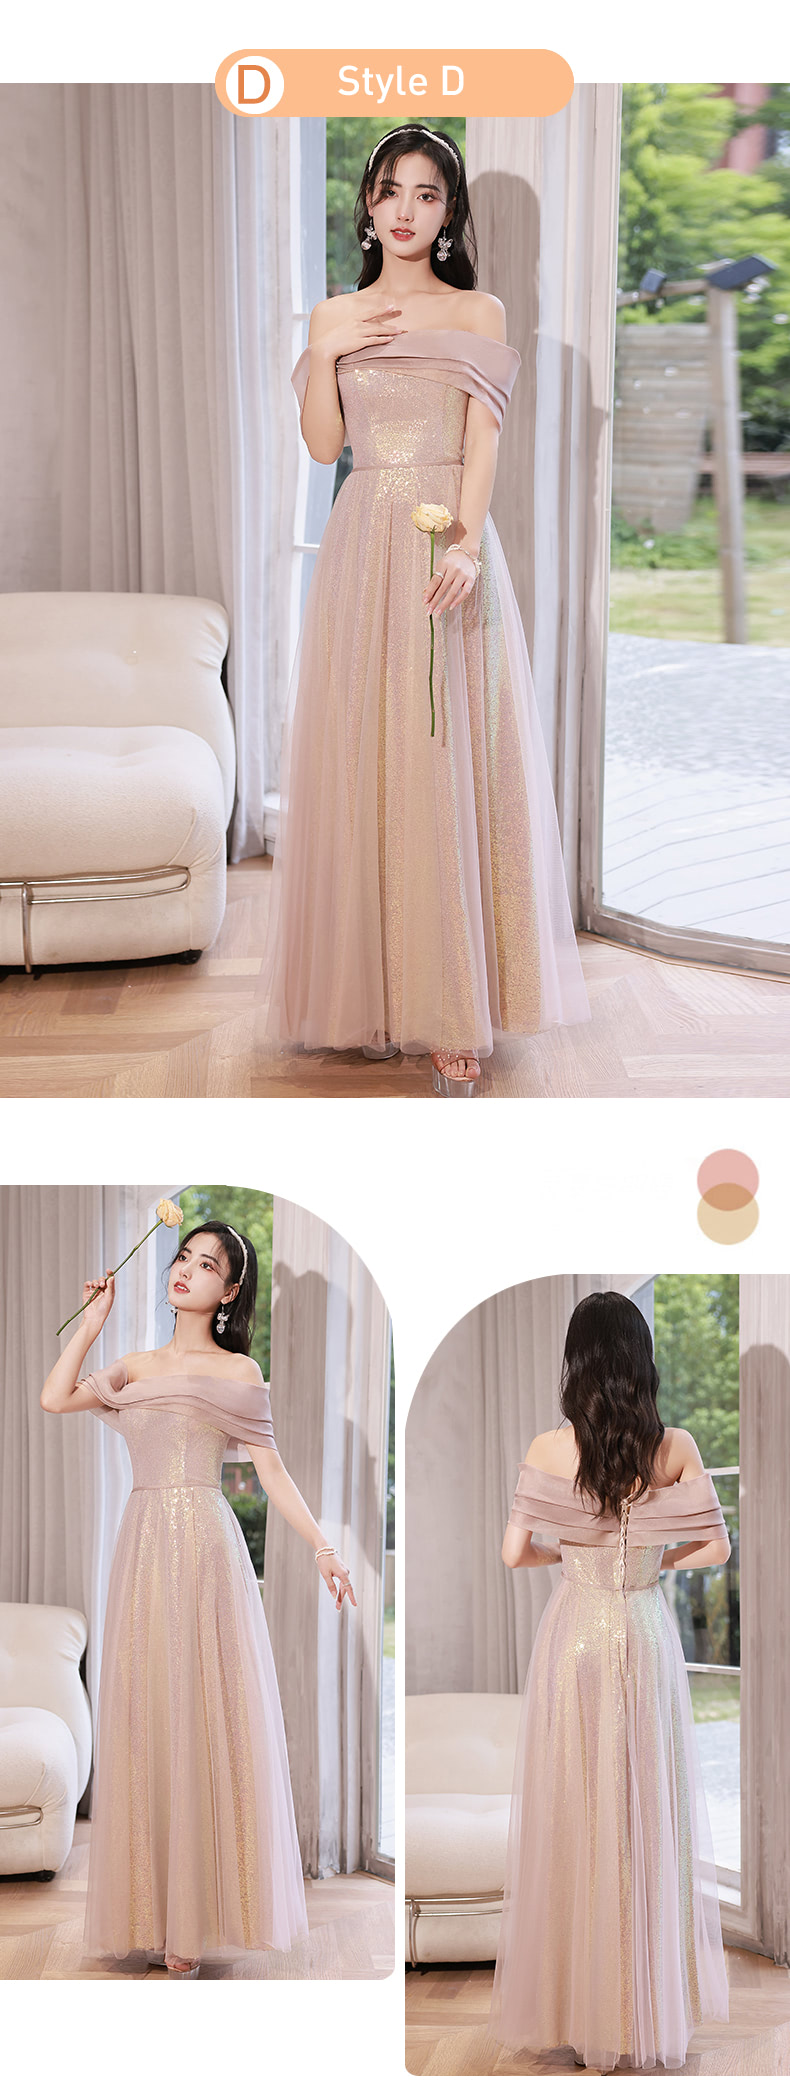 Fairy-Starry-Pink-Slim-Bridesmaid-Long-Dress-Wedding-Party-Gown20.jpg